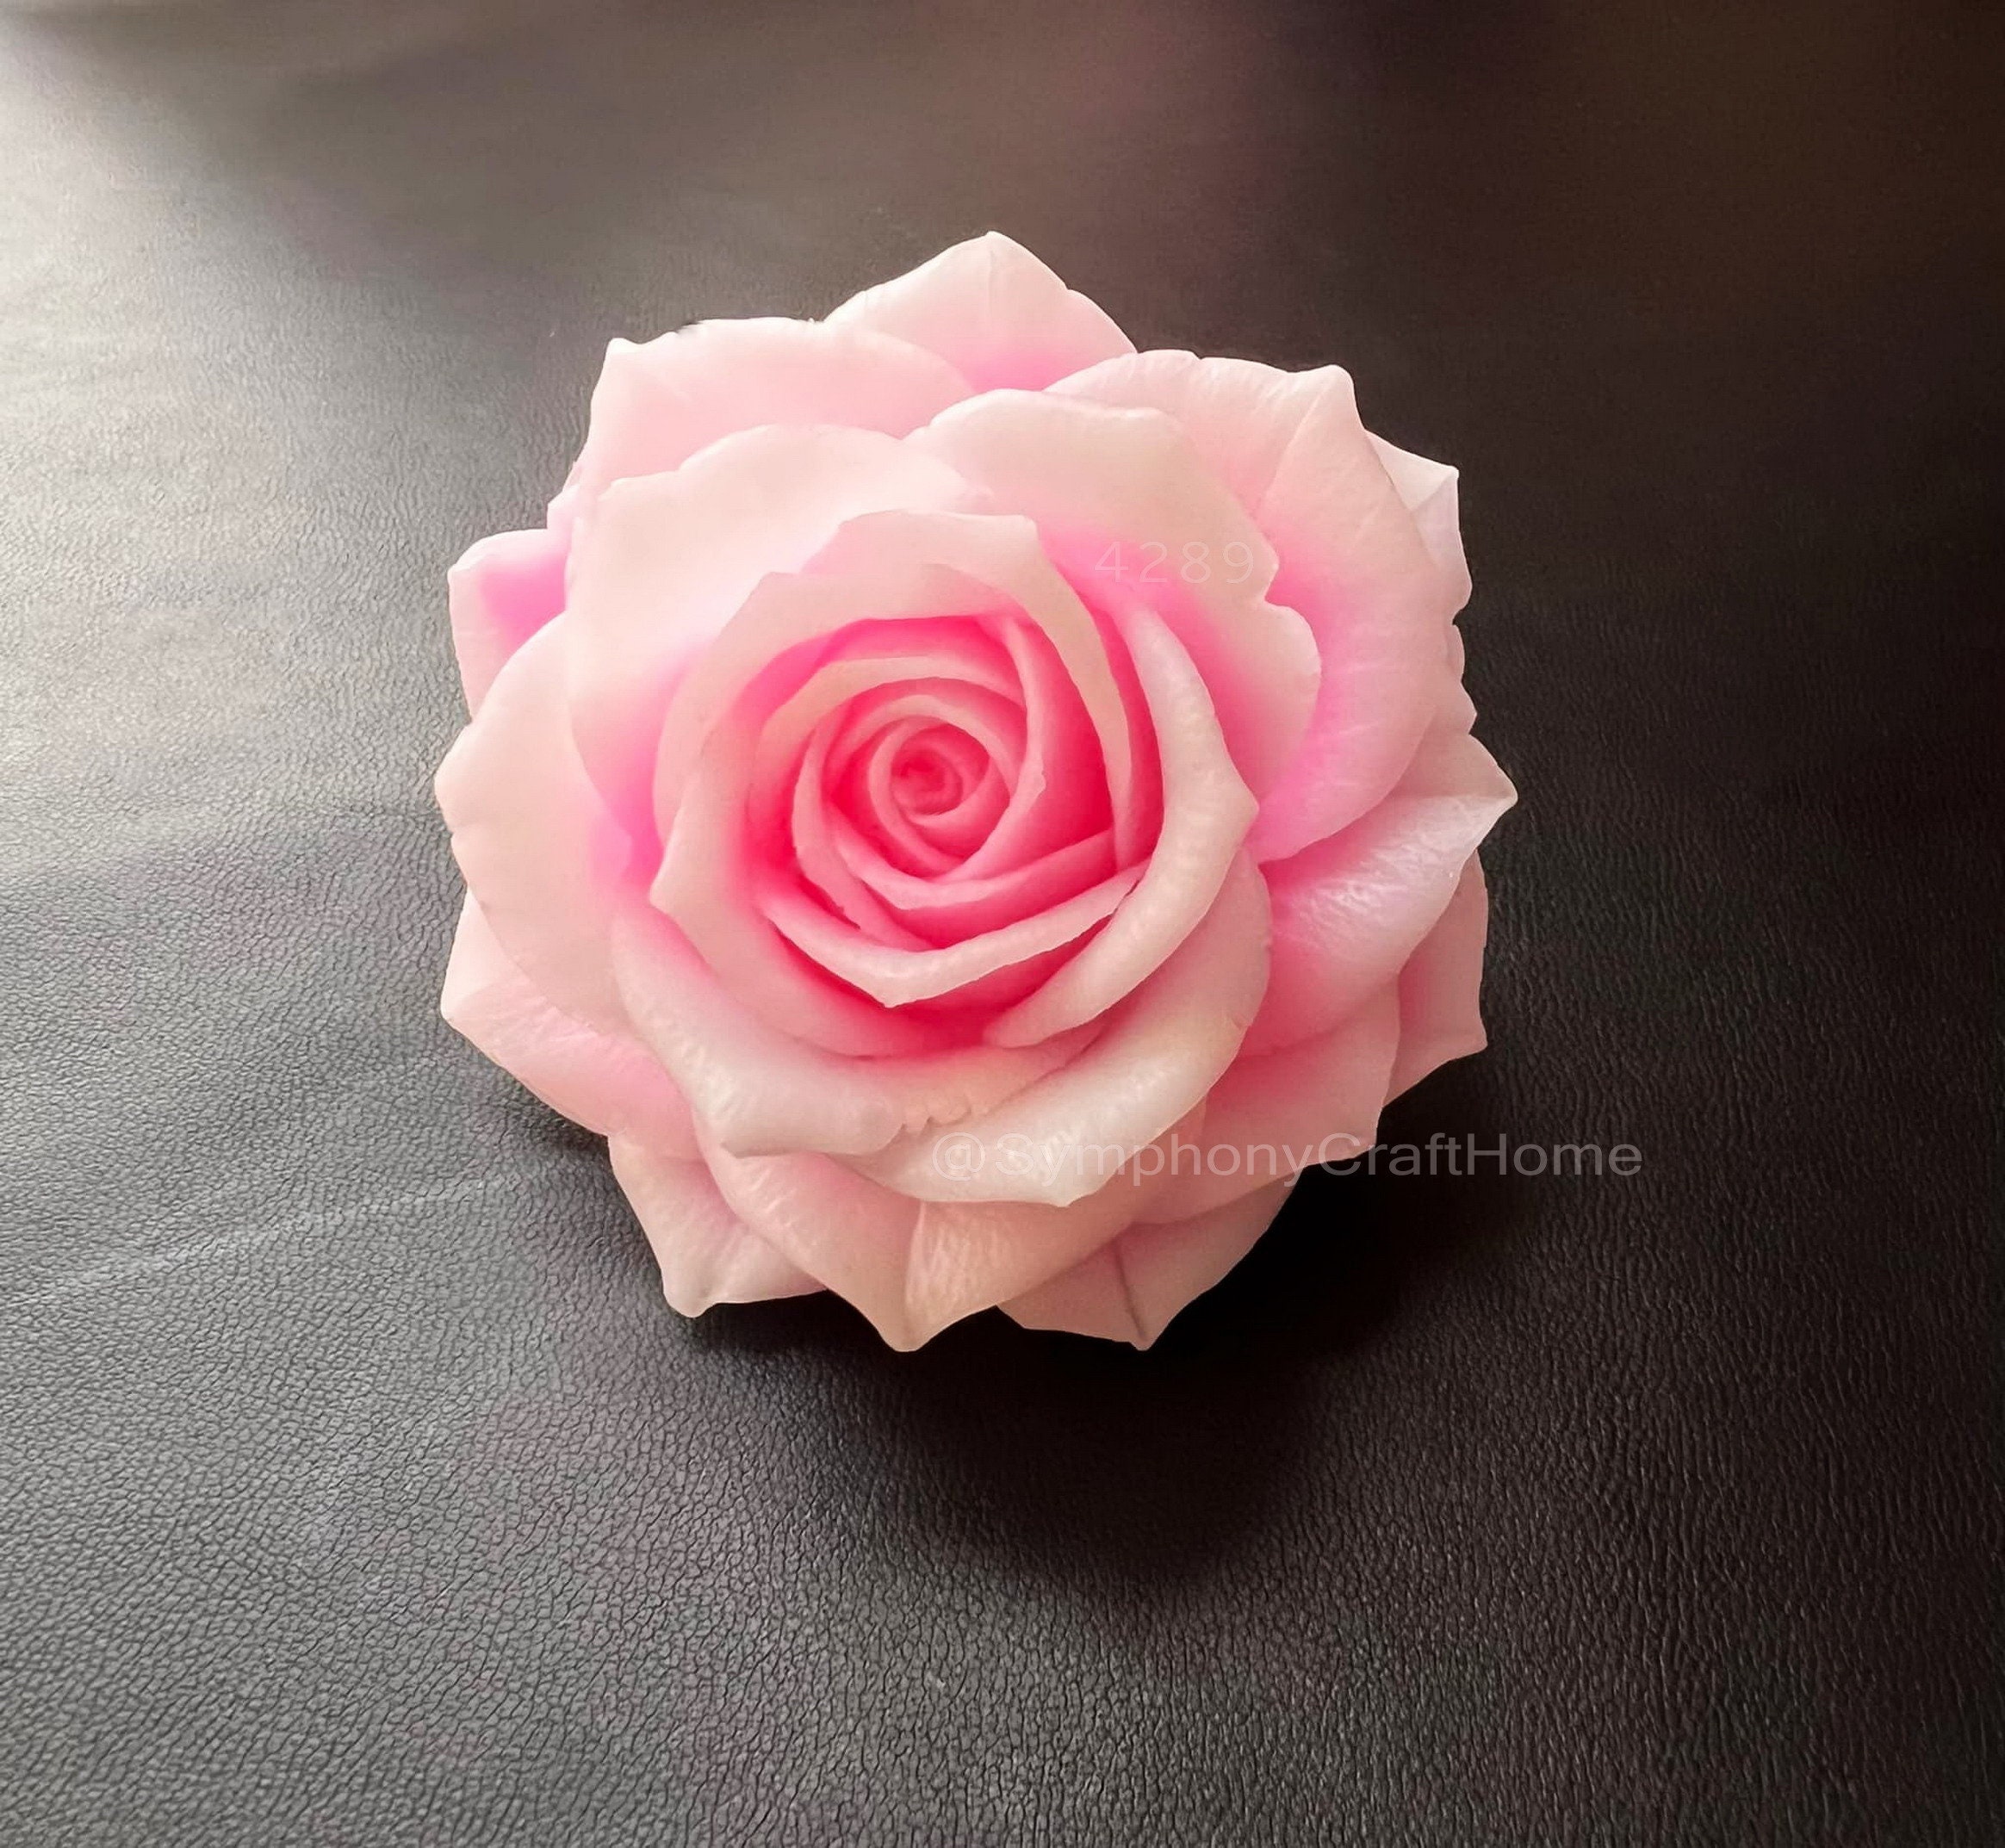 Rose Shape Silicone Soap Mould at Rs 300, सिलिकॉन साबुन का सांचा in  Coimbatore